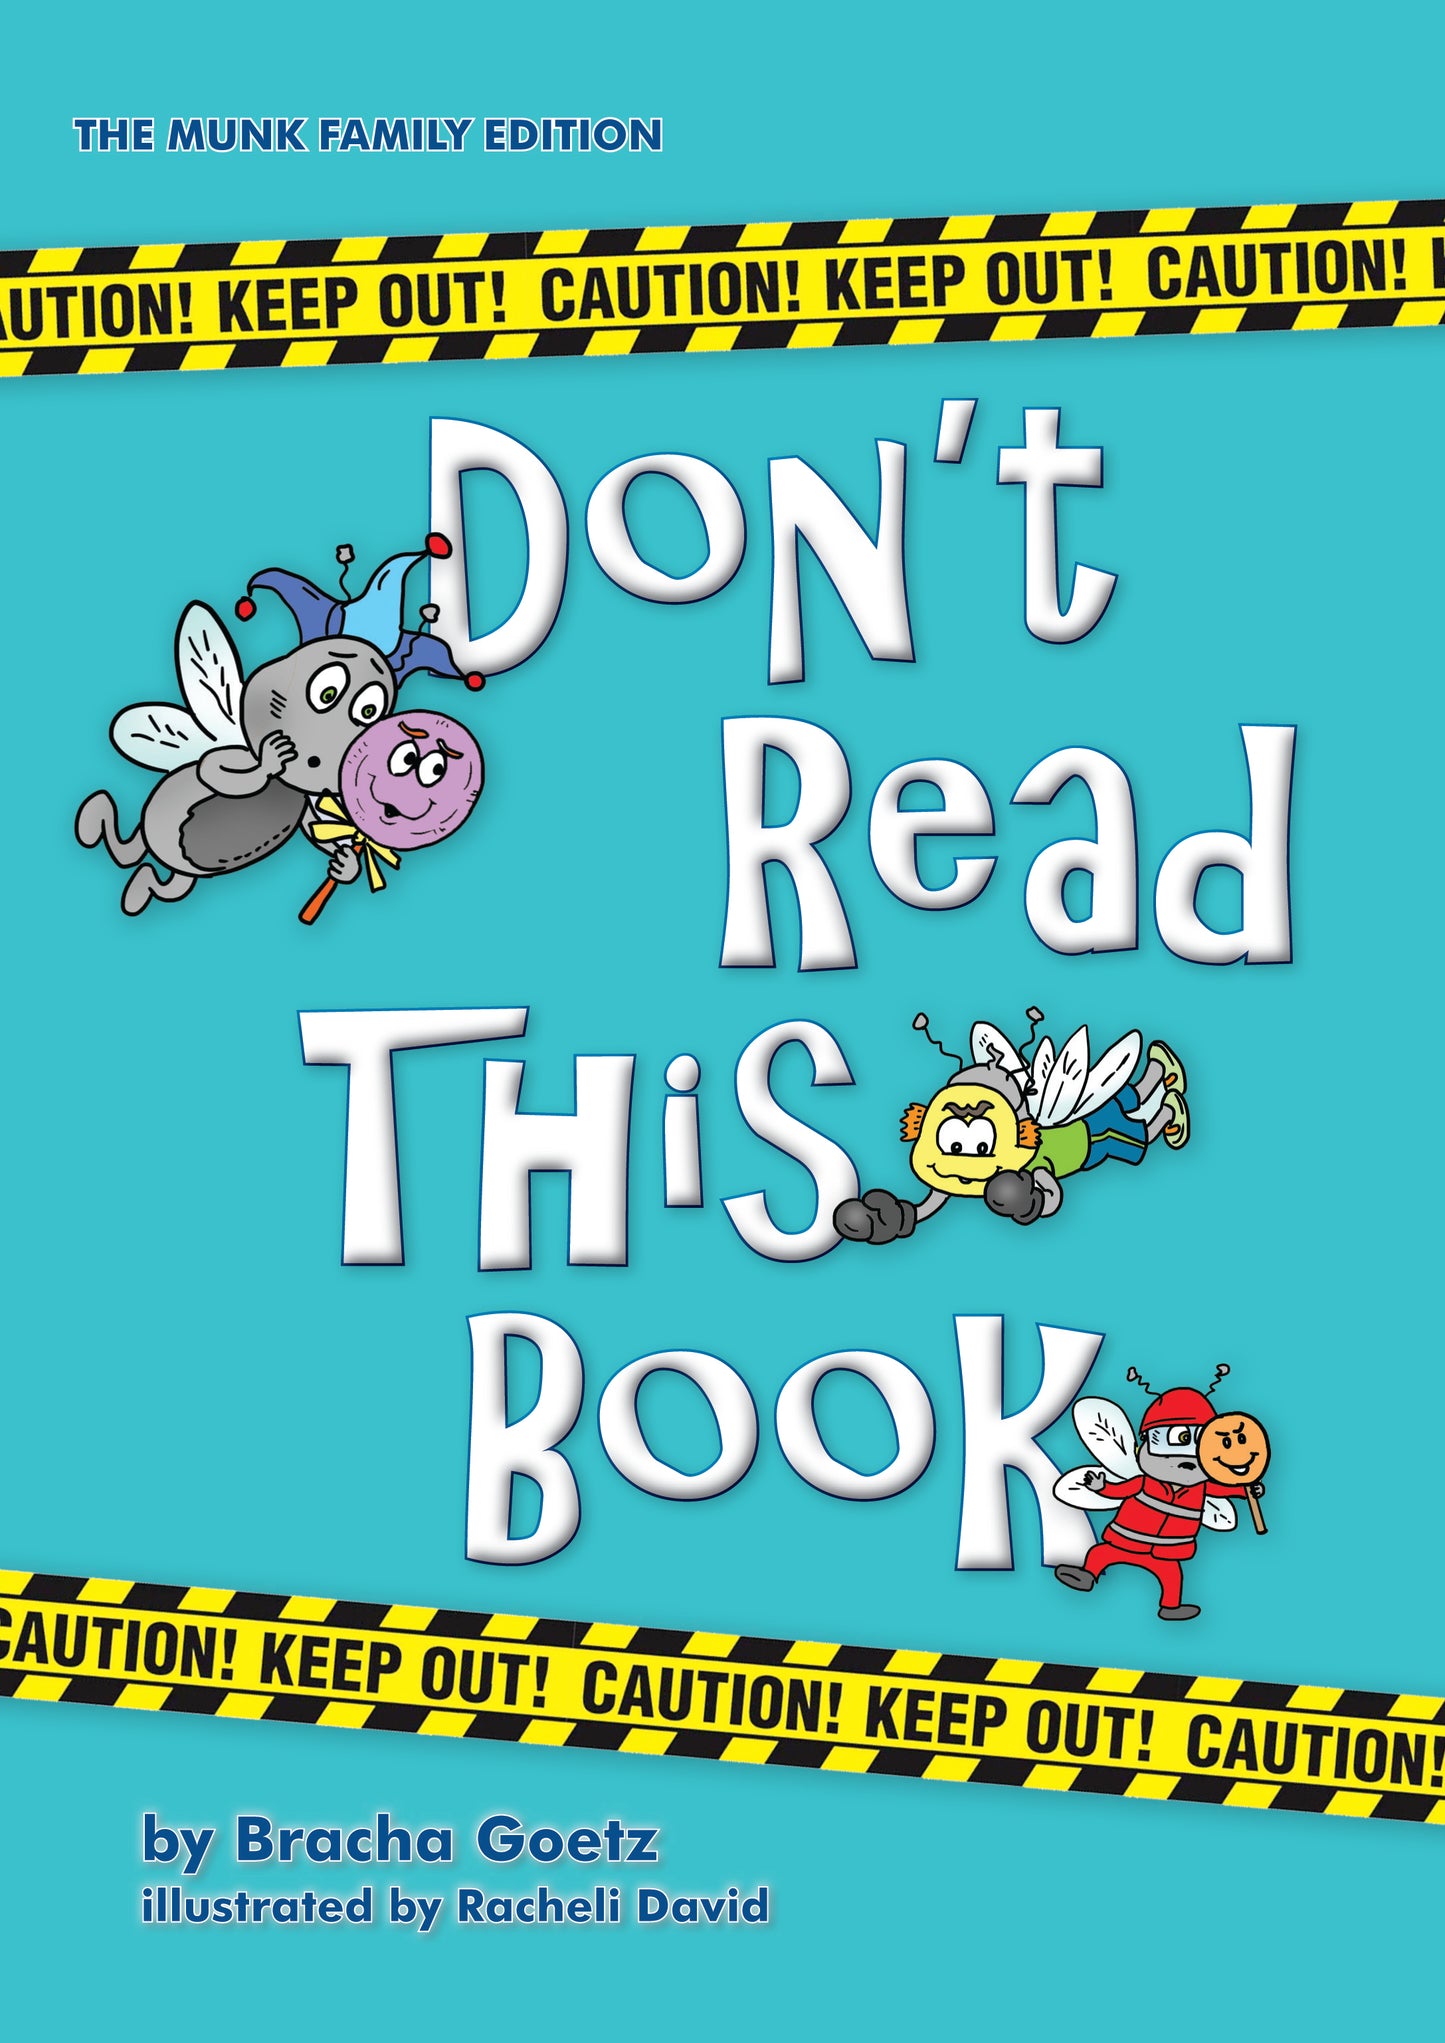 Don't Read This Book: Read-Along Audiobook Download